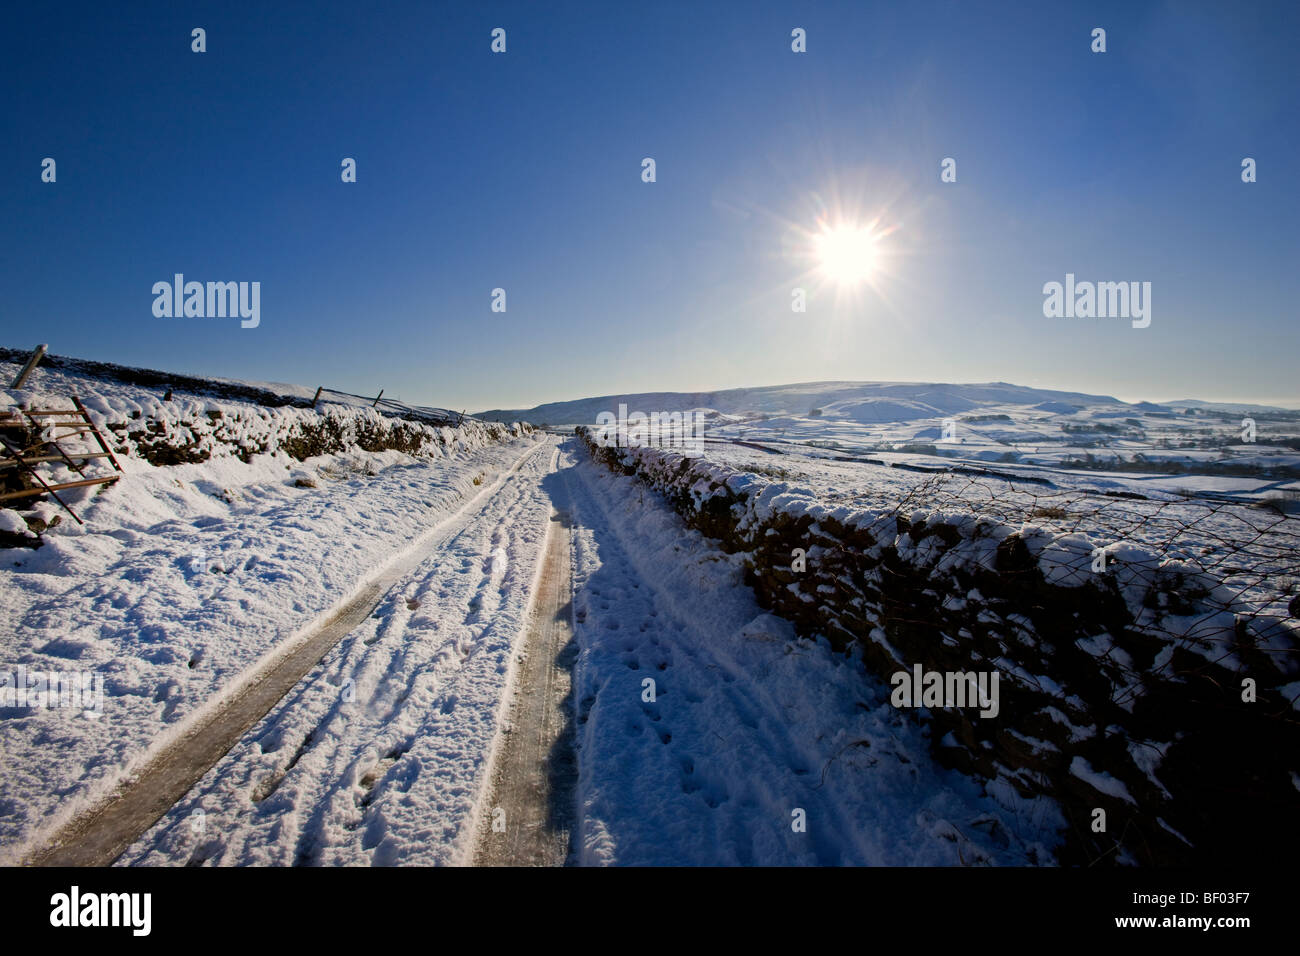 A snowy road in Upper Wharfedale, Yorkshire Dales UK Stock Photo